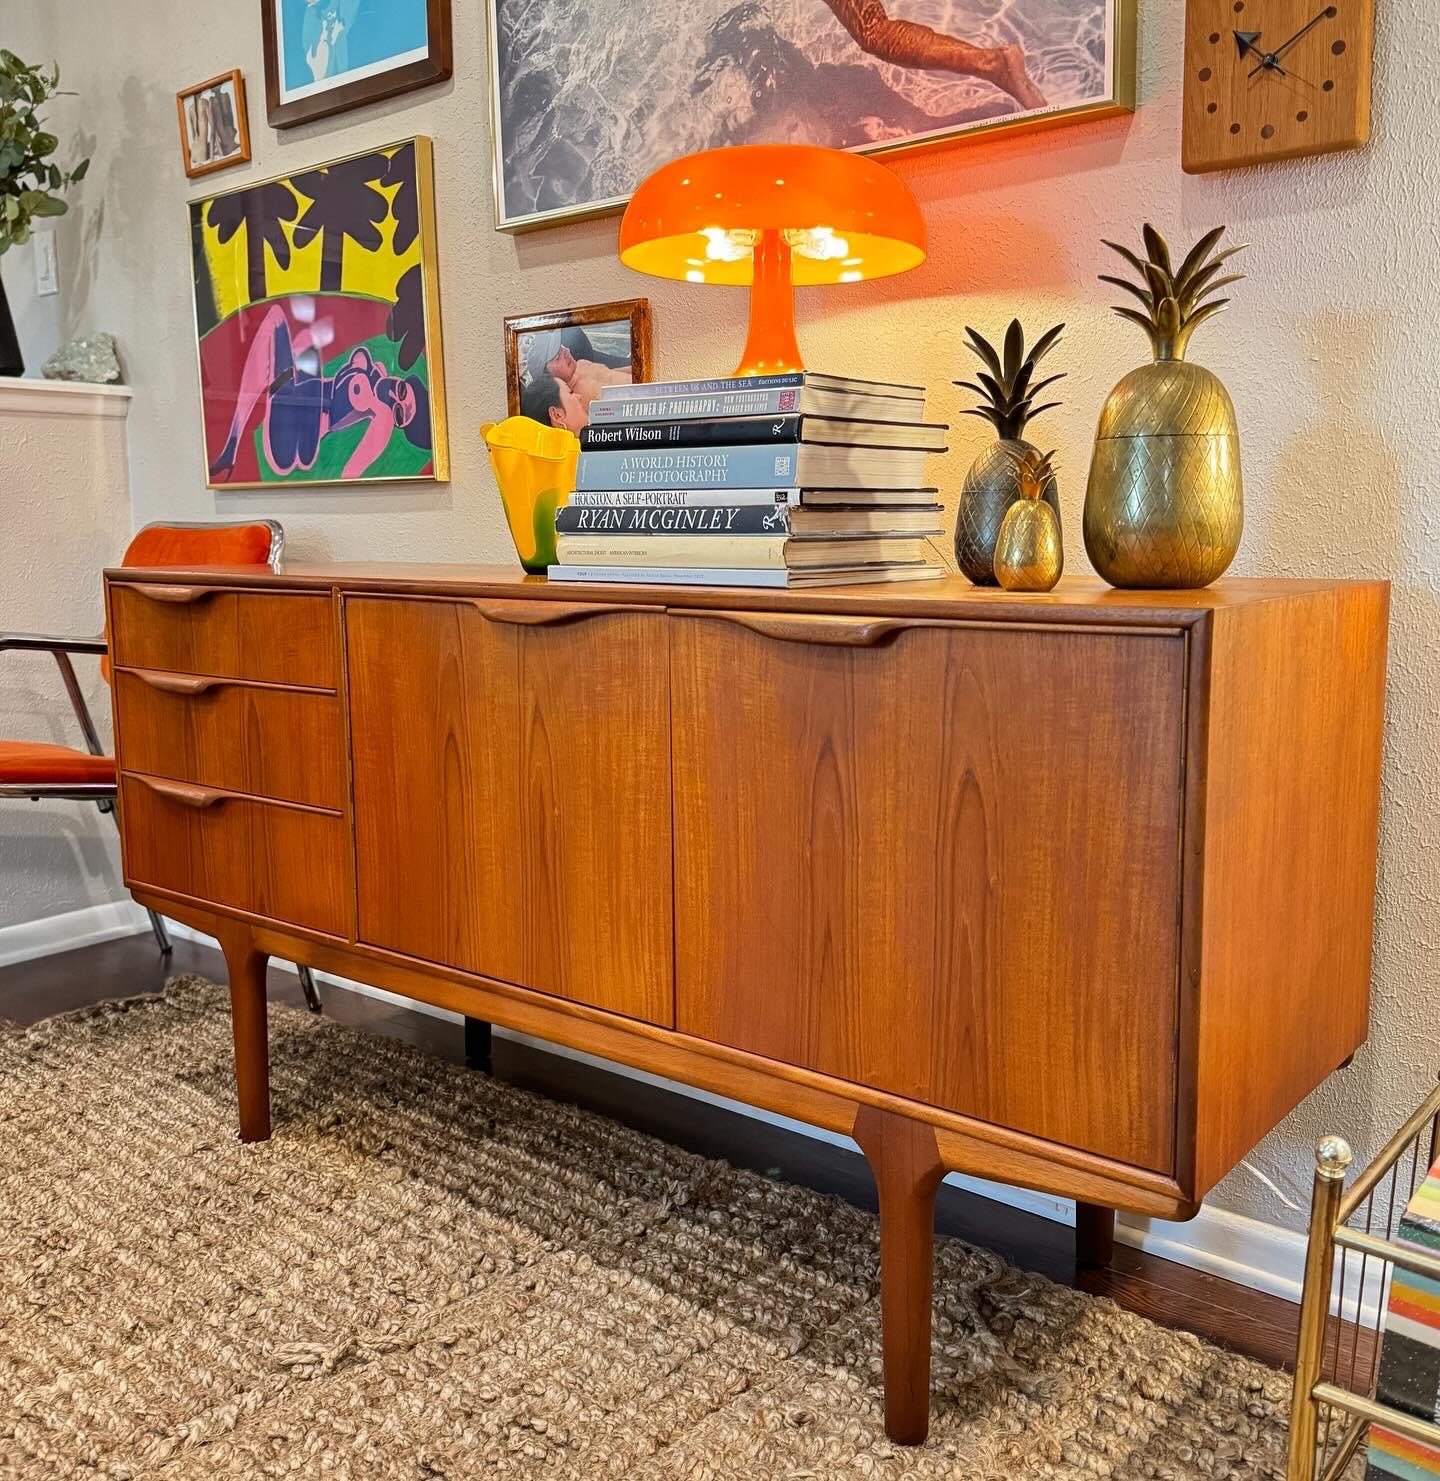 Teak Vintage mid century modern sideboard with folded handles made by McIntosh